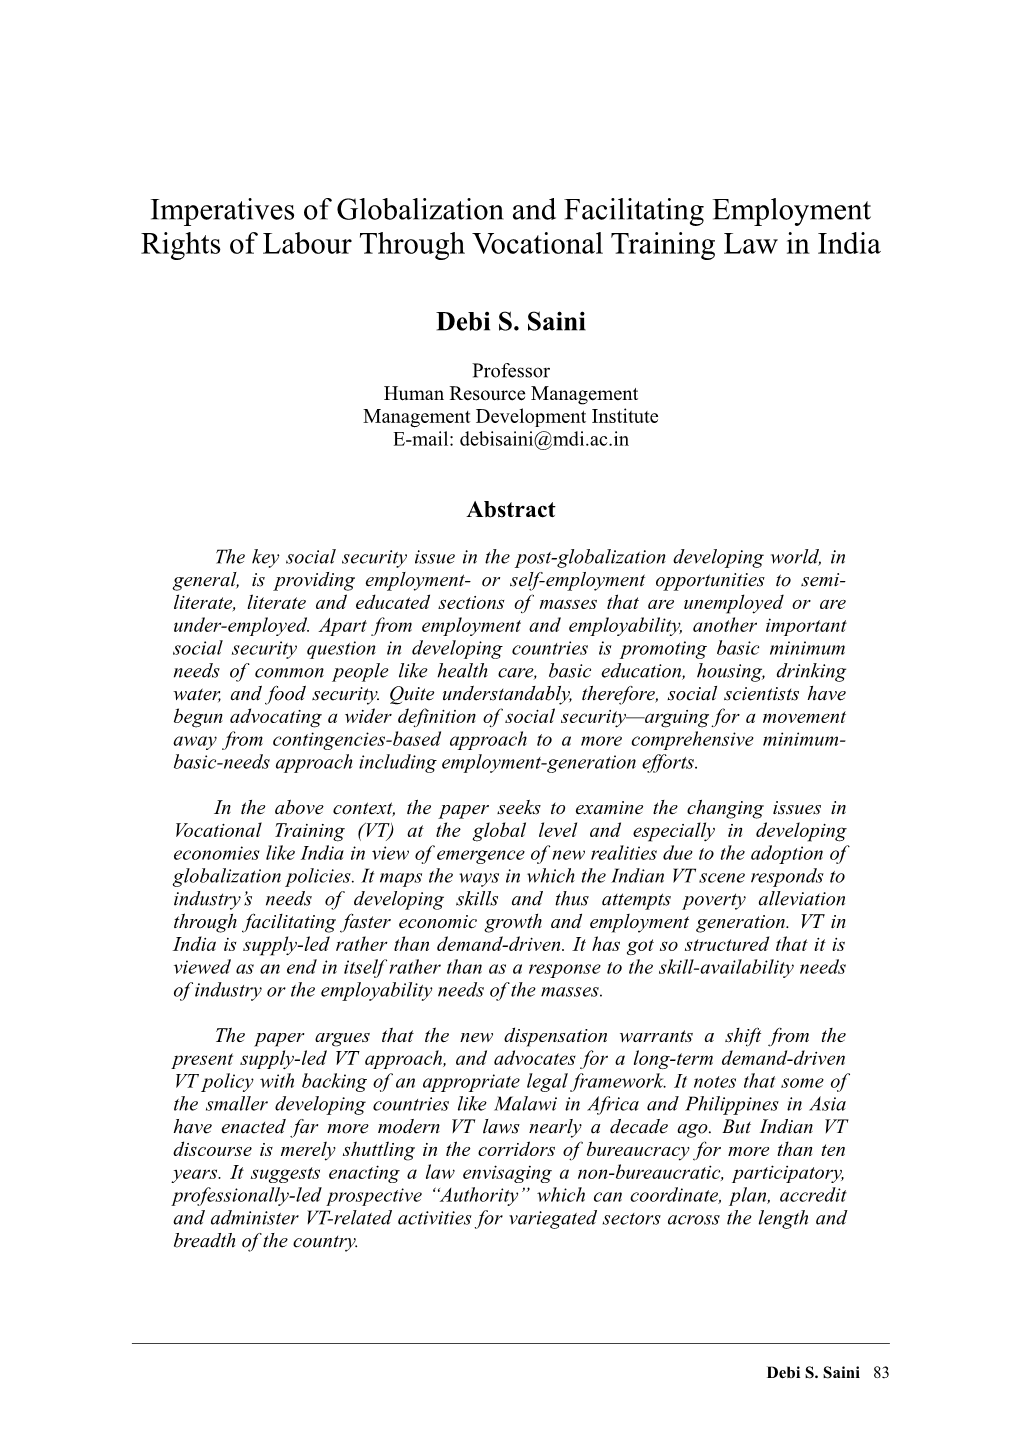 Imperatives of Globalization and Facilitating Employment Rights of Labour Through Vocational